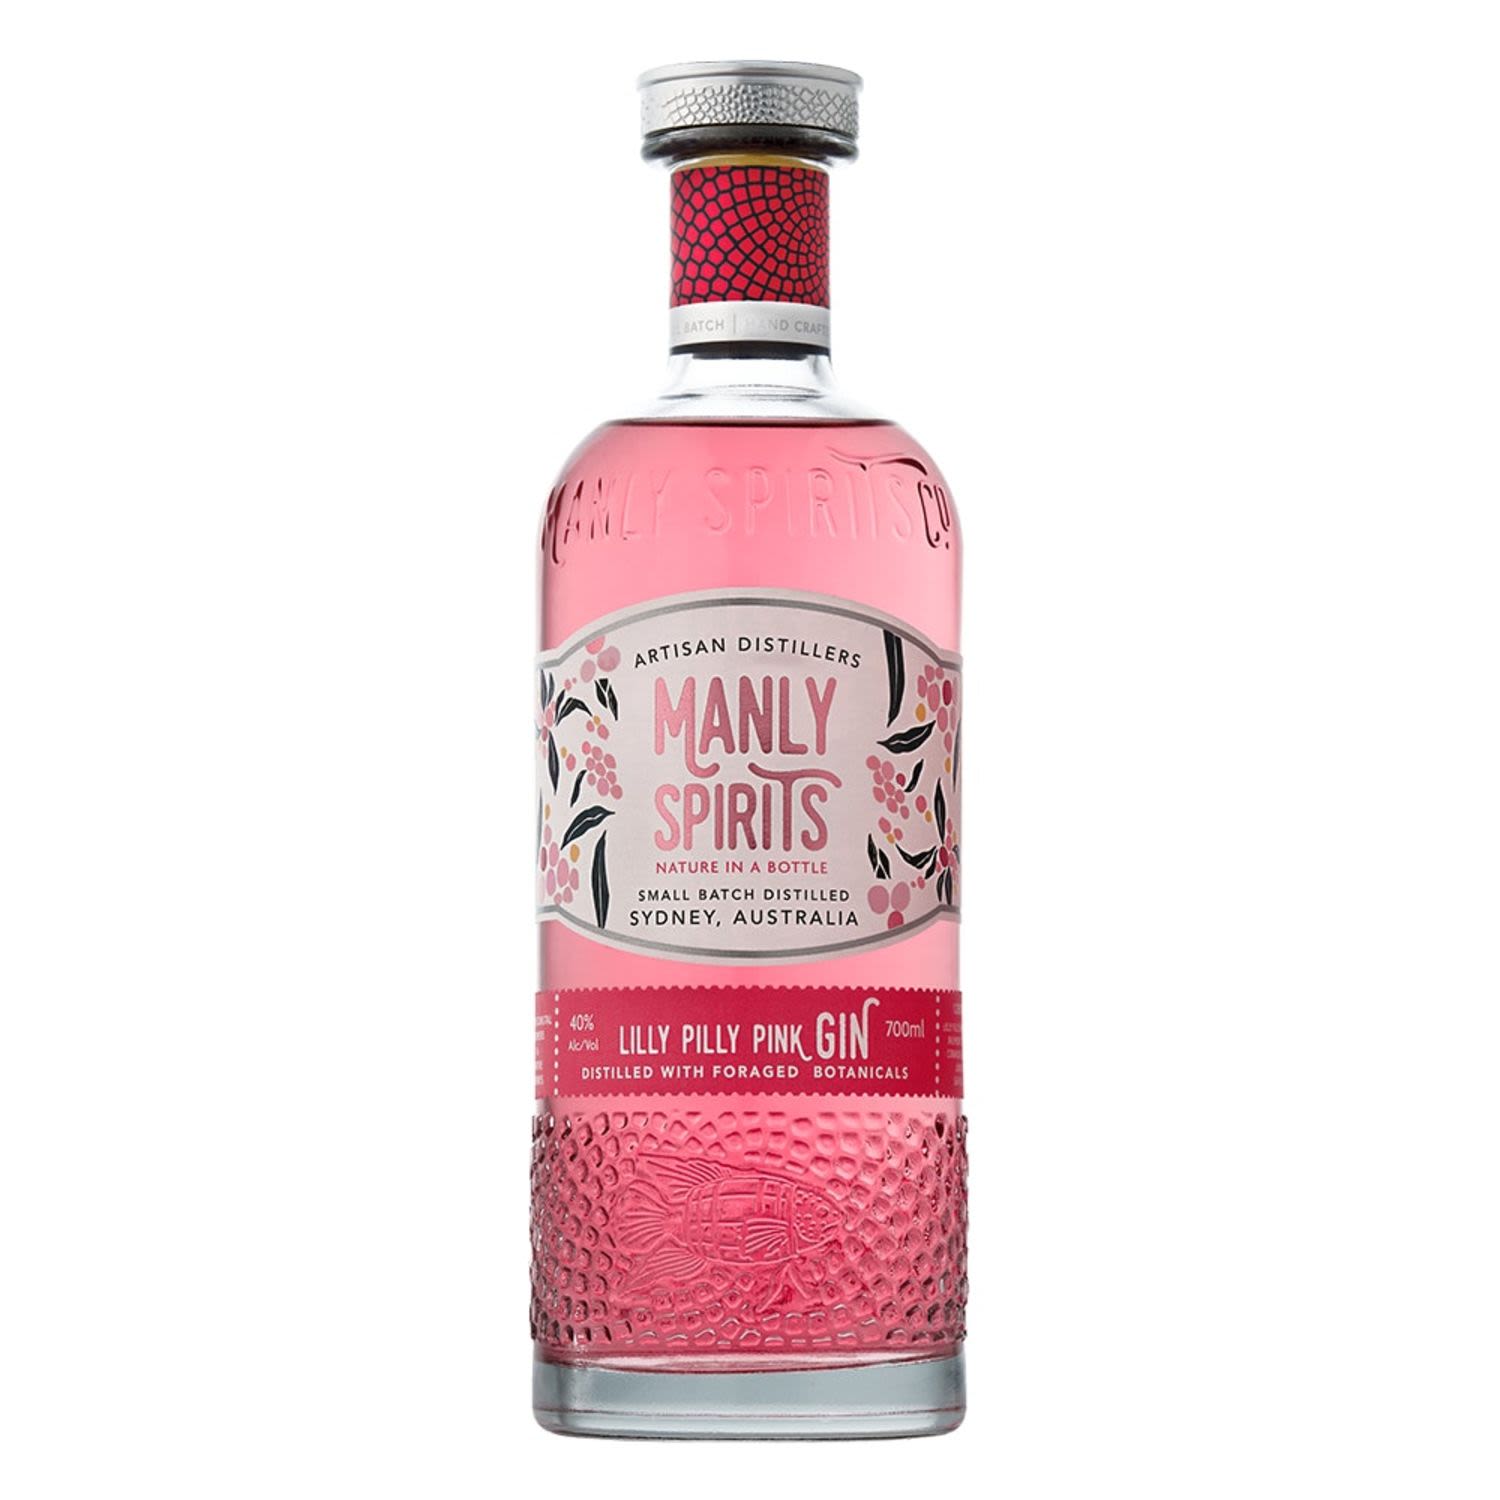 Manly Spirits Lilly Pilly Pink Gin 700mL Bottle